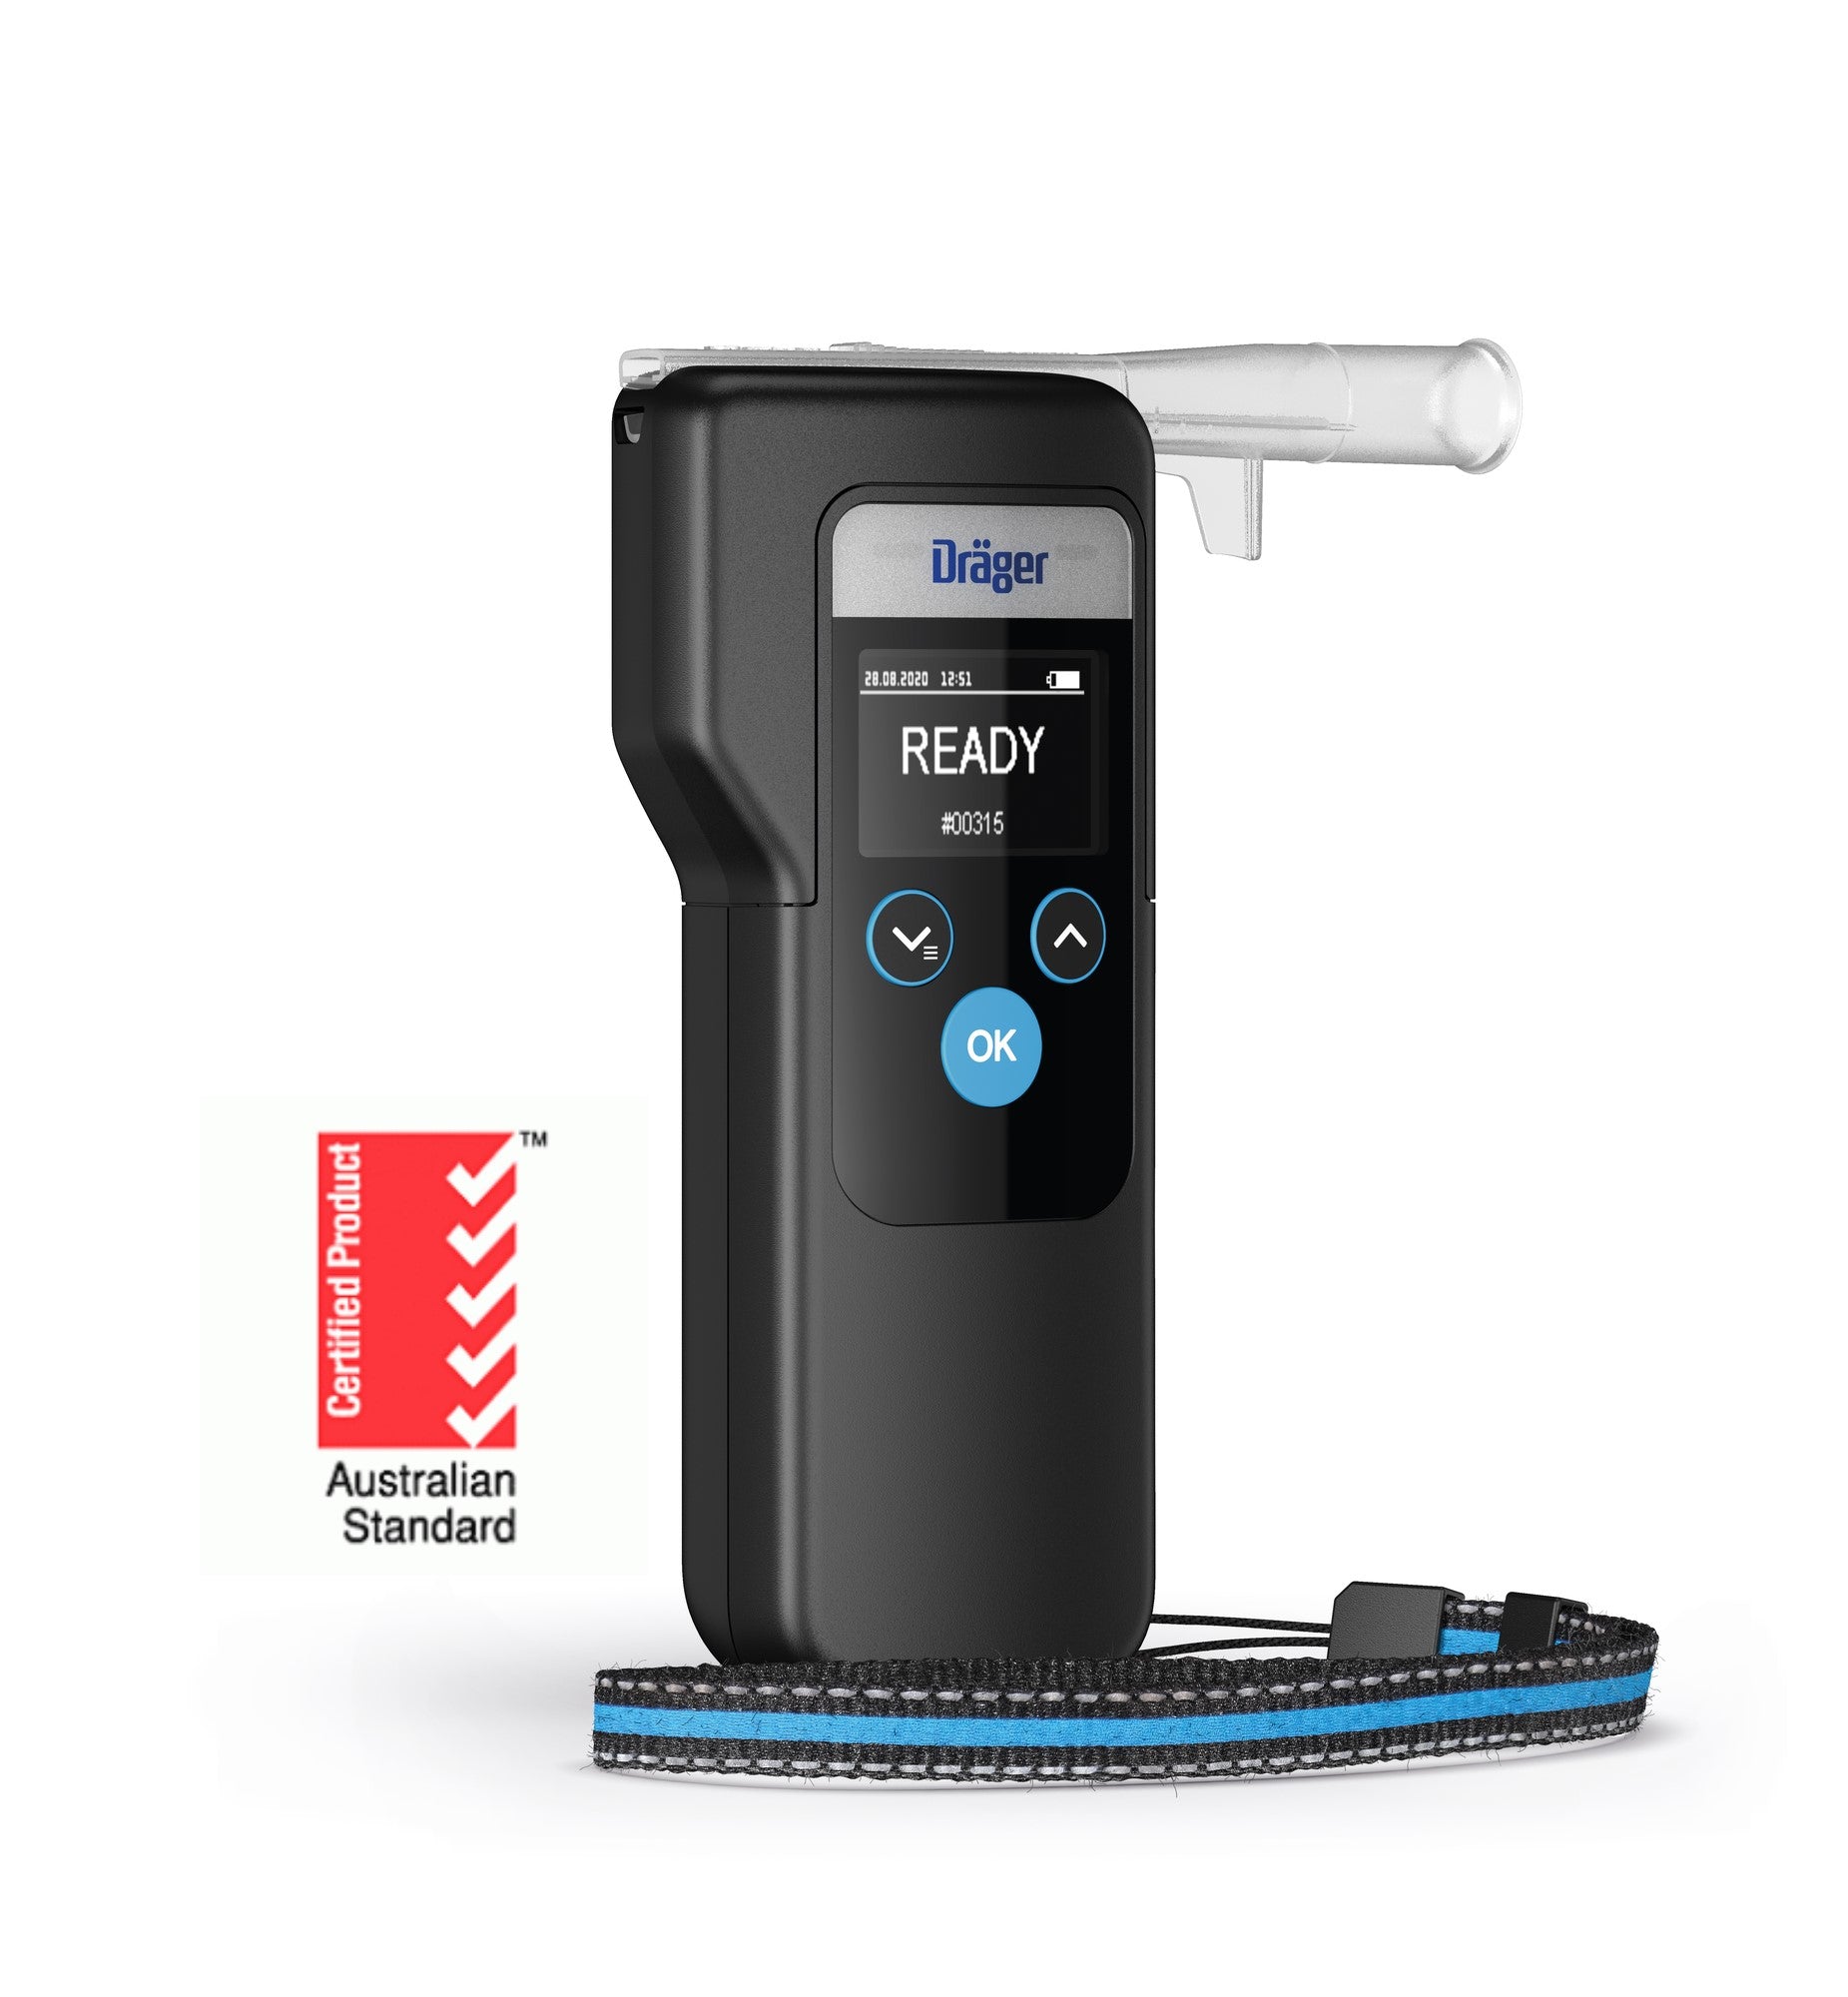 Dräger Alcotest 5000 Reliable High-Speed Breathalyzer for Mass Screening,  Digital Breath Alcohol Screening Device for Professional Use